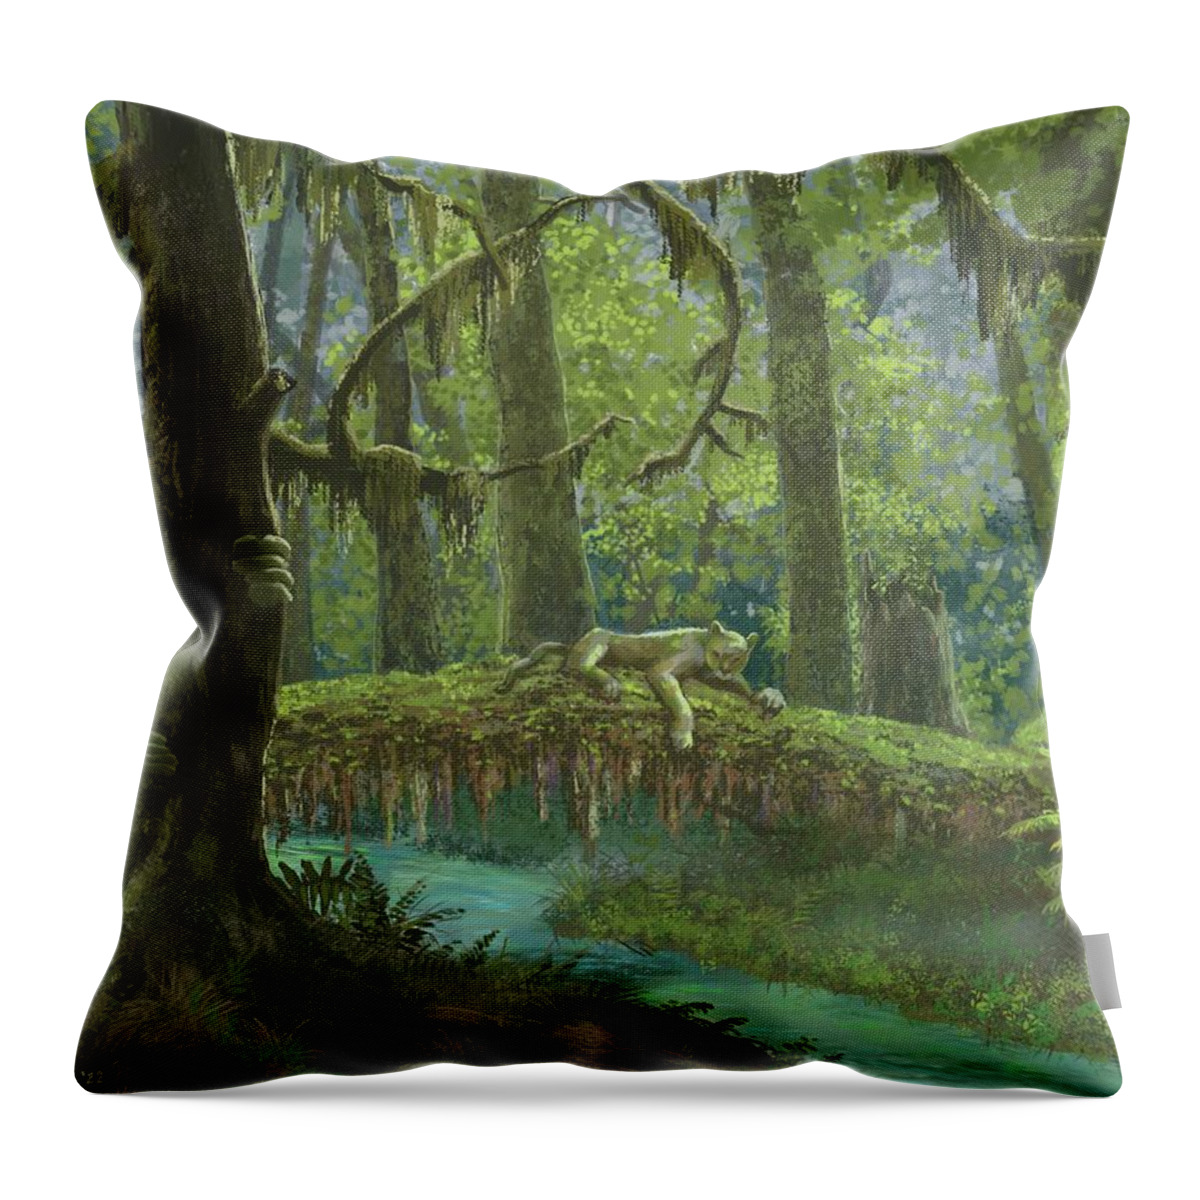 Rainforest Throw Pillow featuring the painting Rainforest Afternoon by Don Morgan